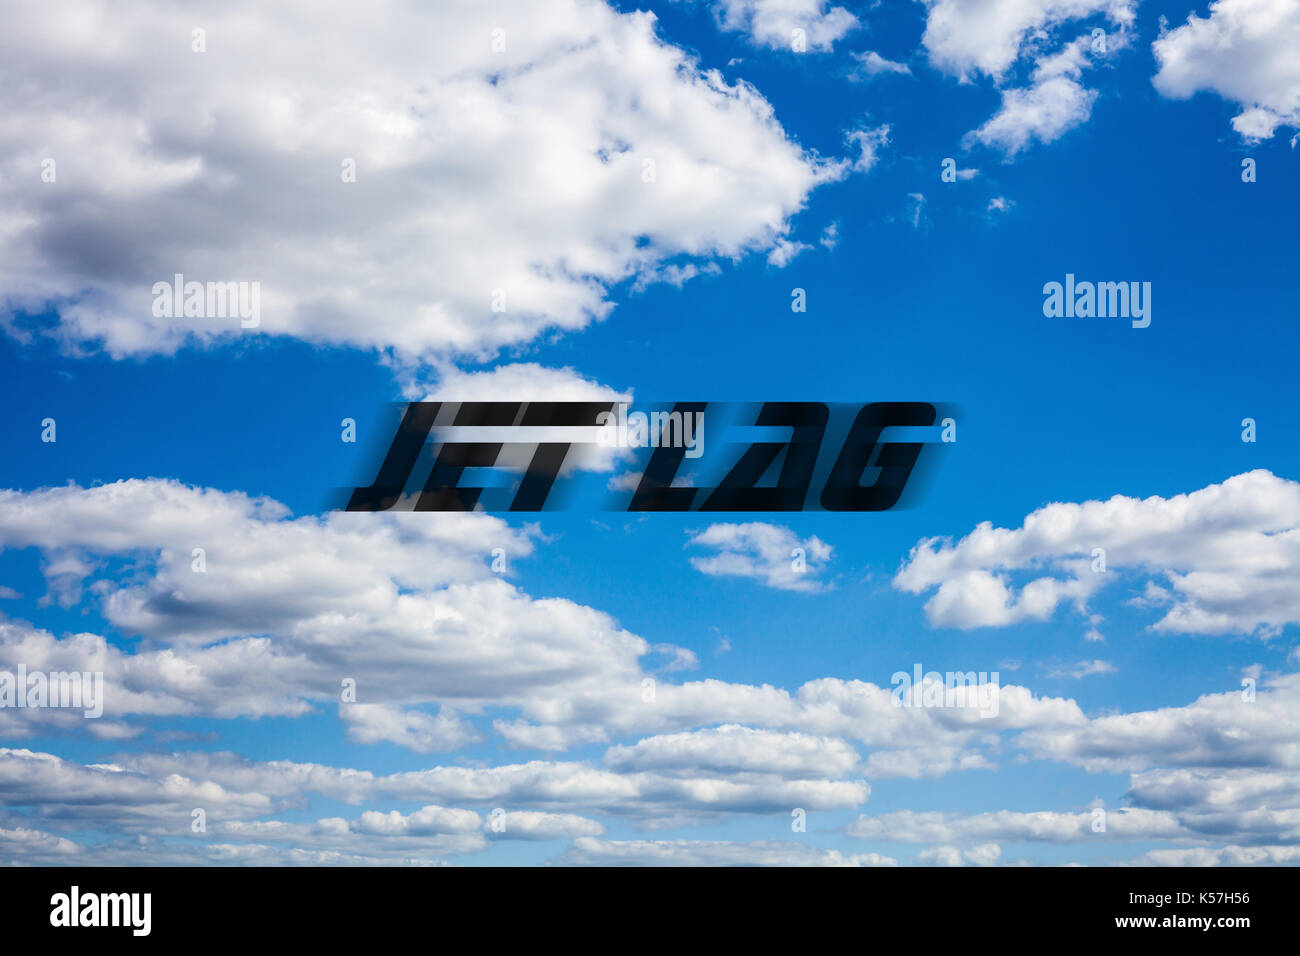 Jet lag writing on blue cloudy sky background Stock Photo